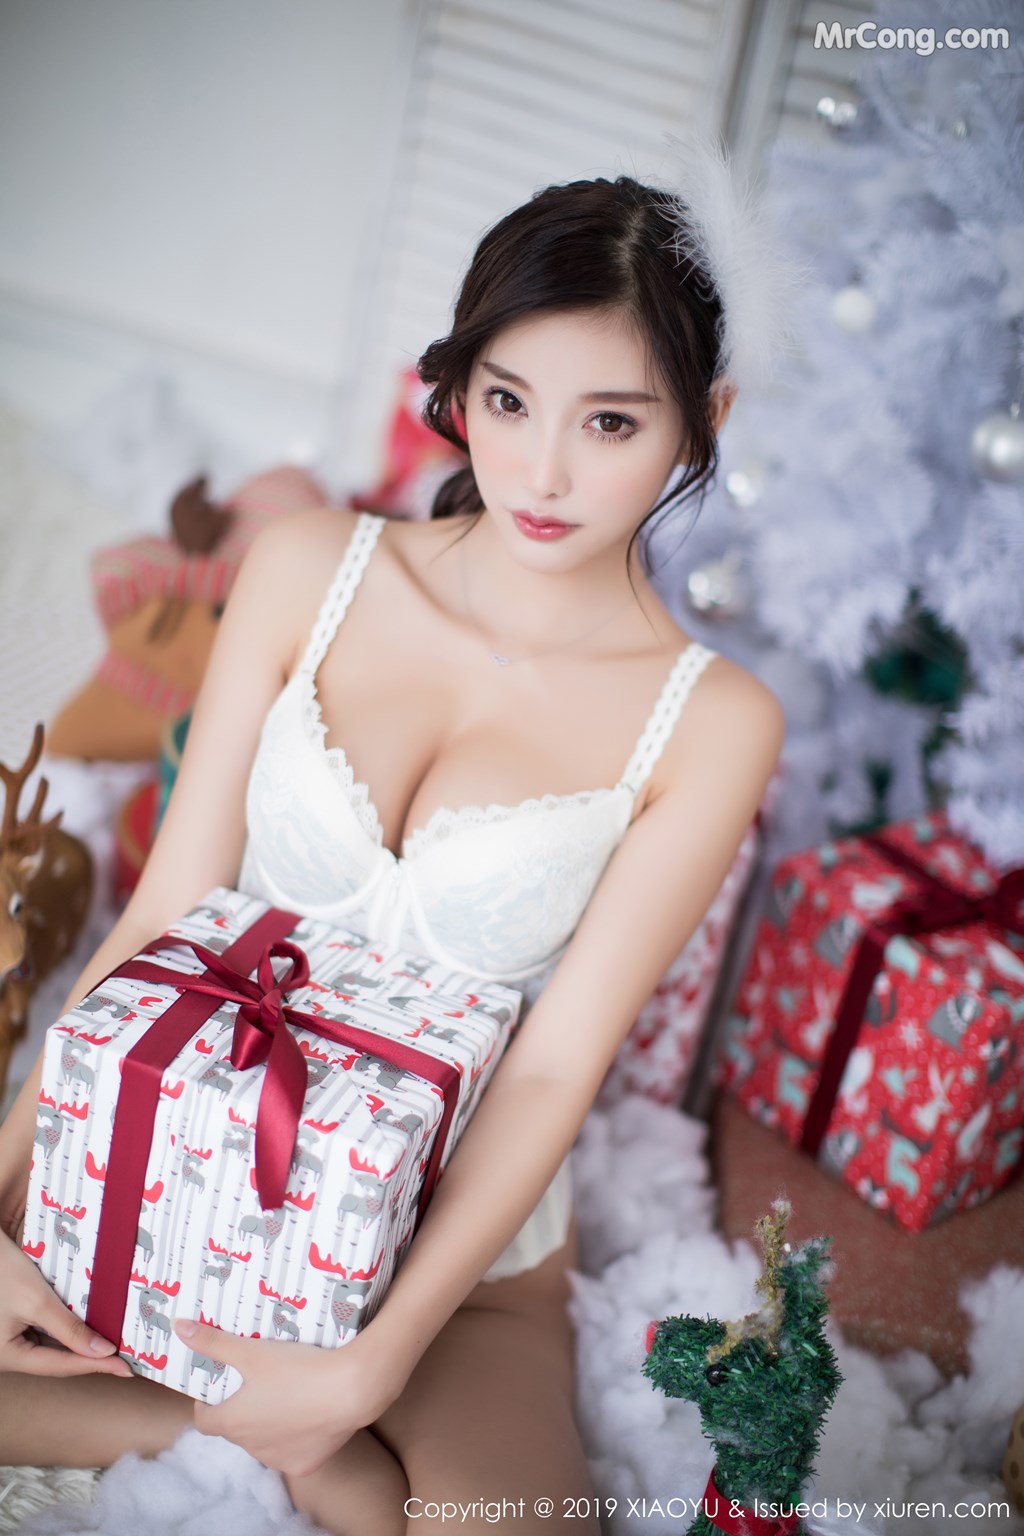 XiaoYu Vol. 5959: Yang Chen Chen (杨晨晨 sugar) (46 pictures)